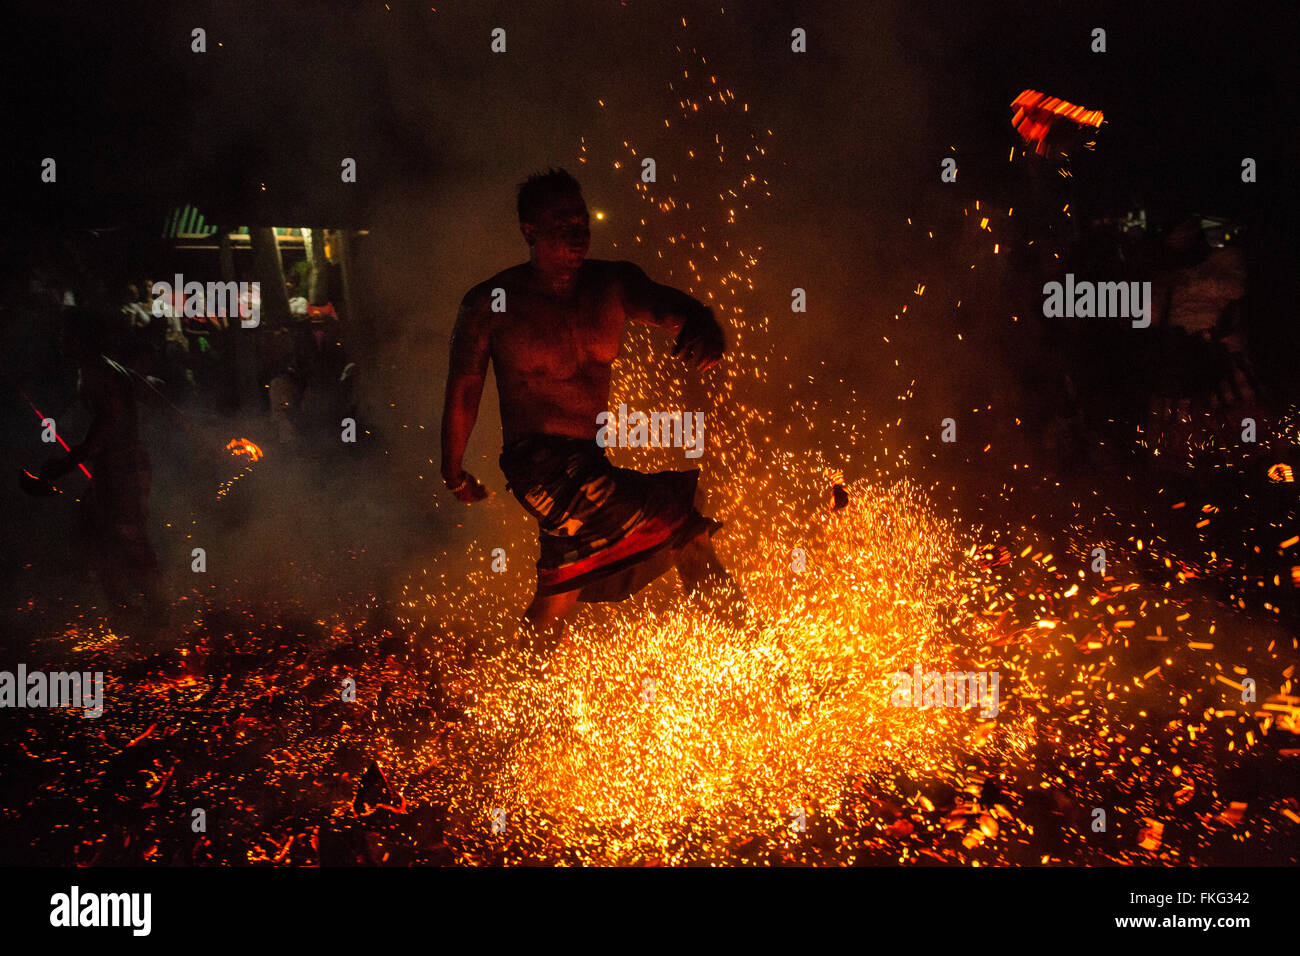 Bali, Indonesia. 08th Mar, 2016. A Balinese man kicks the burned coconut husk during the 'Mesabatan Api' ritual a head of Nyepi Day on March, 2016 at Banjar Nagi in Gianyar, Bali, Indonesia. Mesabatan Api is held annually a day before the Nyepi Day of Silence, as symbolizes the purification of universe and human body trough fire. Nyepi is a Hindu celebration observed every new year according to the Balinese calendar. Credit:  Agung Parameswara/Alamy Live News Stock Photo